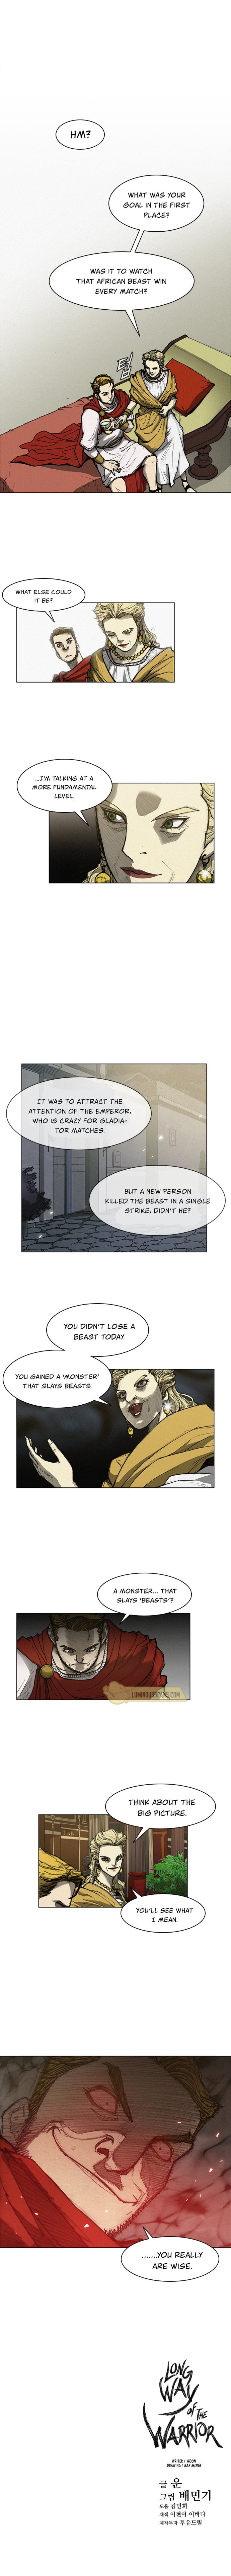 Long Way of the Warrior - Chapter 6 Page 10